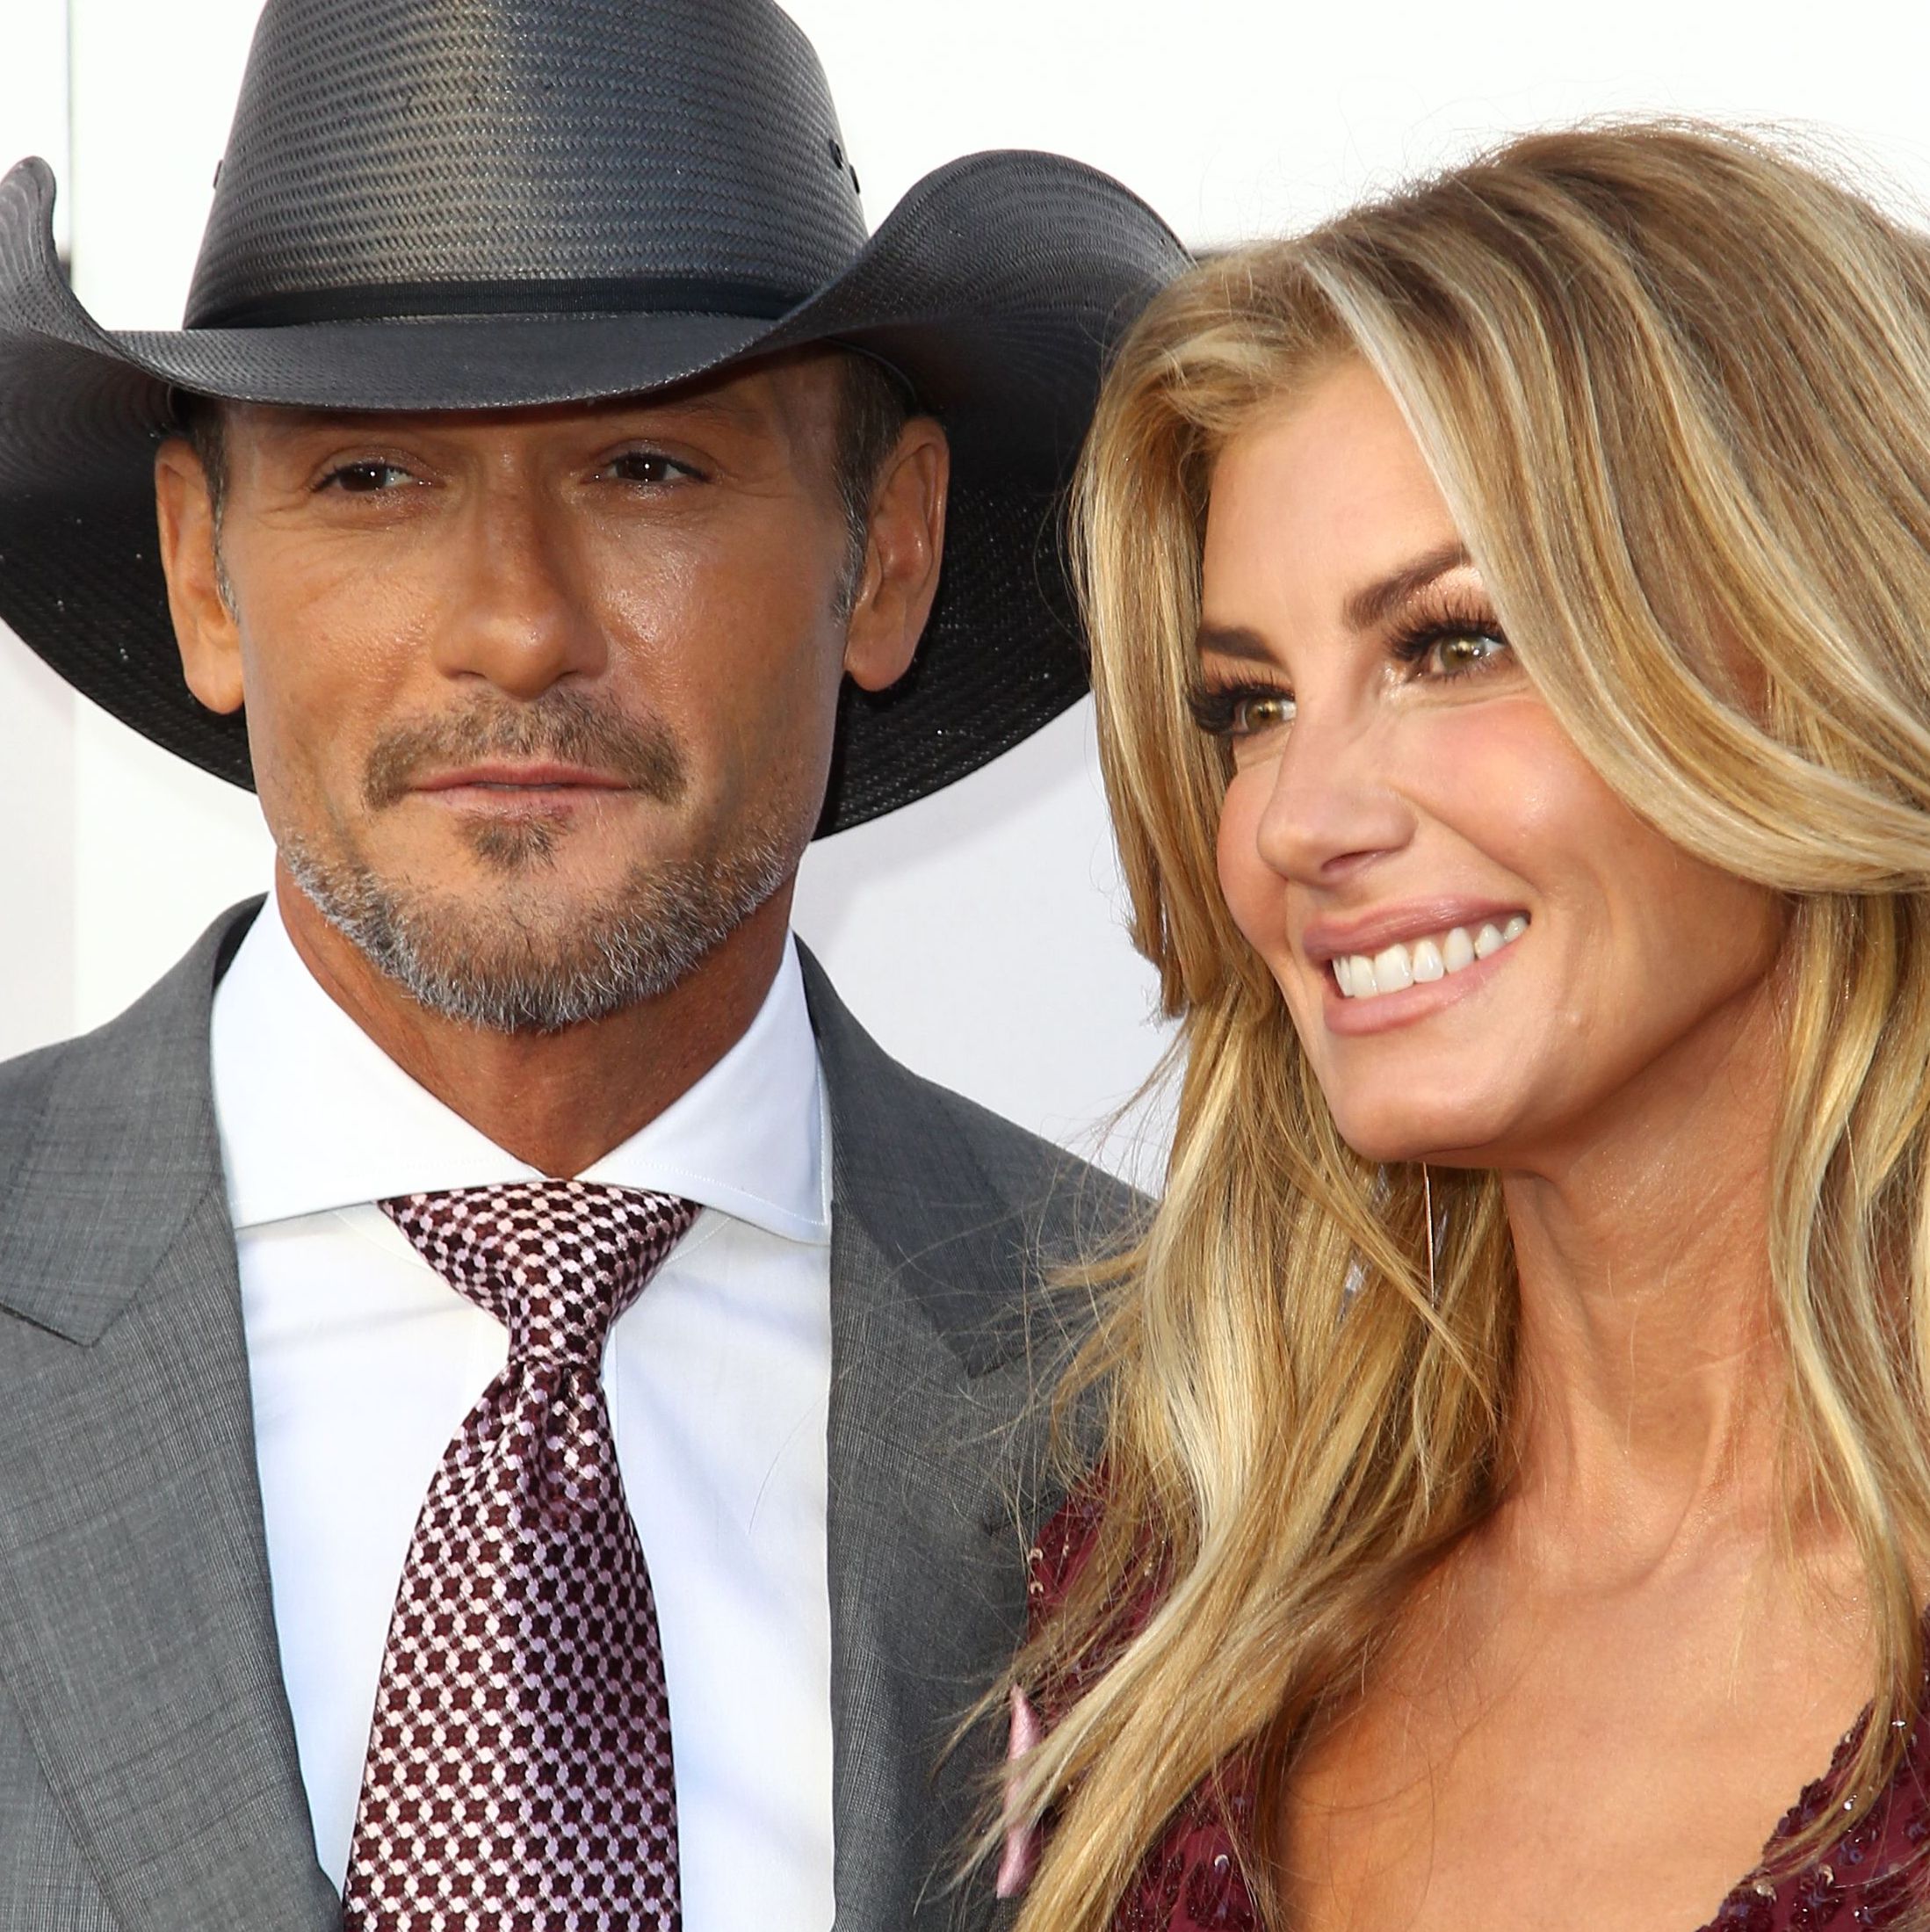 '1883' Fans Urge Faith Hill to “Protect” Tim McGraw After Heart-Pumping Instagram Video